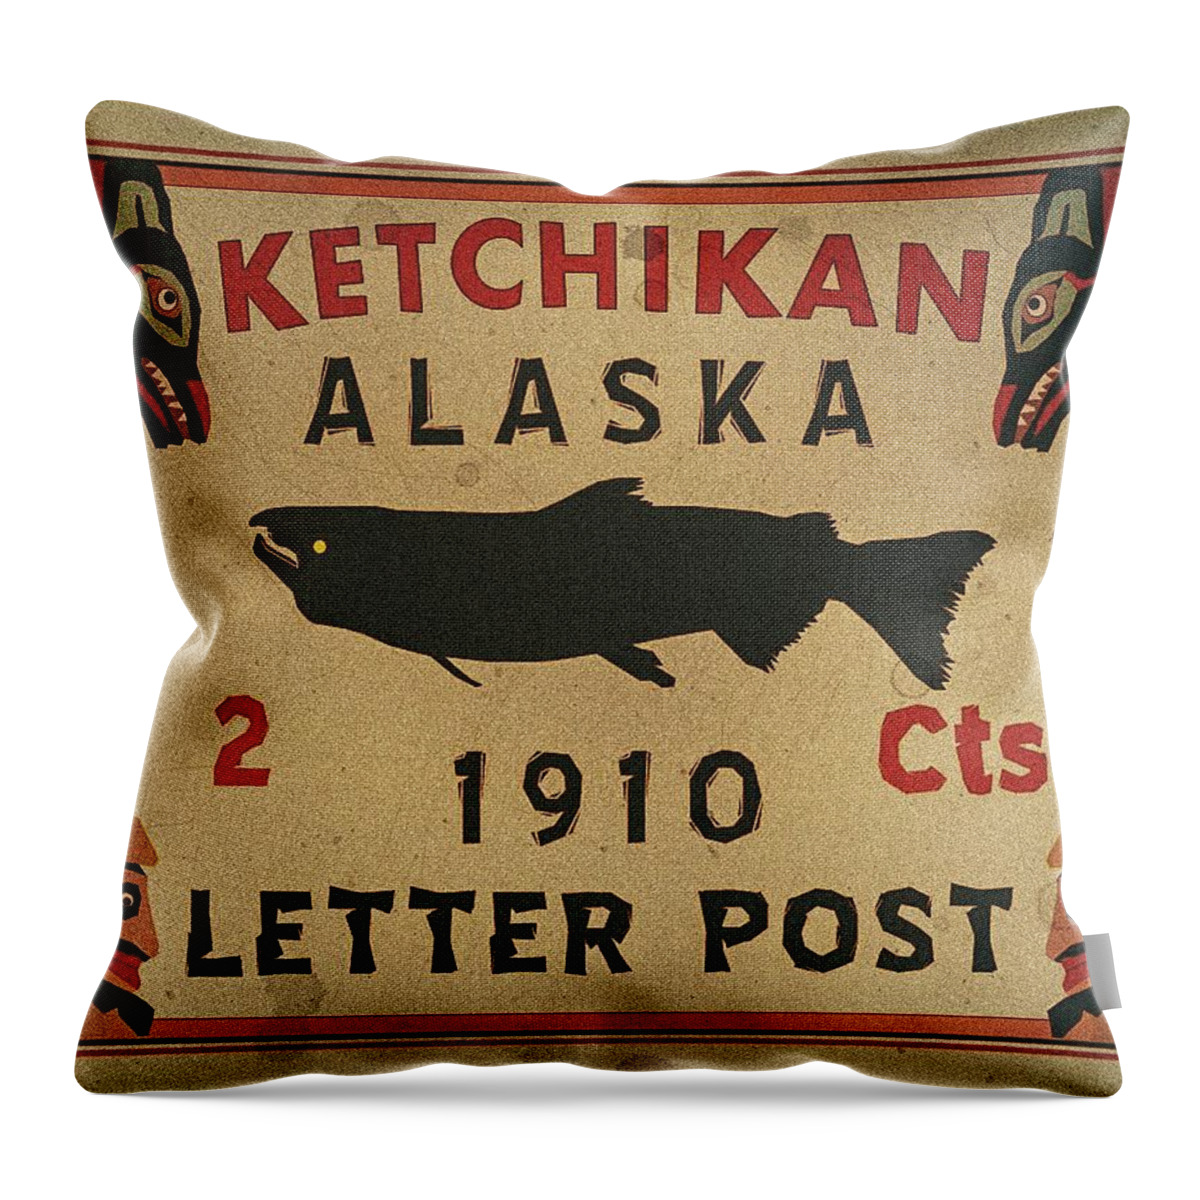 Cinderellas Throw Pillow featuring the digital art 1910 Ketchikan Alaska 2cts.Letter Post - Original Edition by Fred Larucci